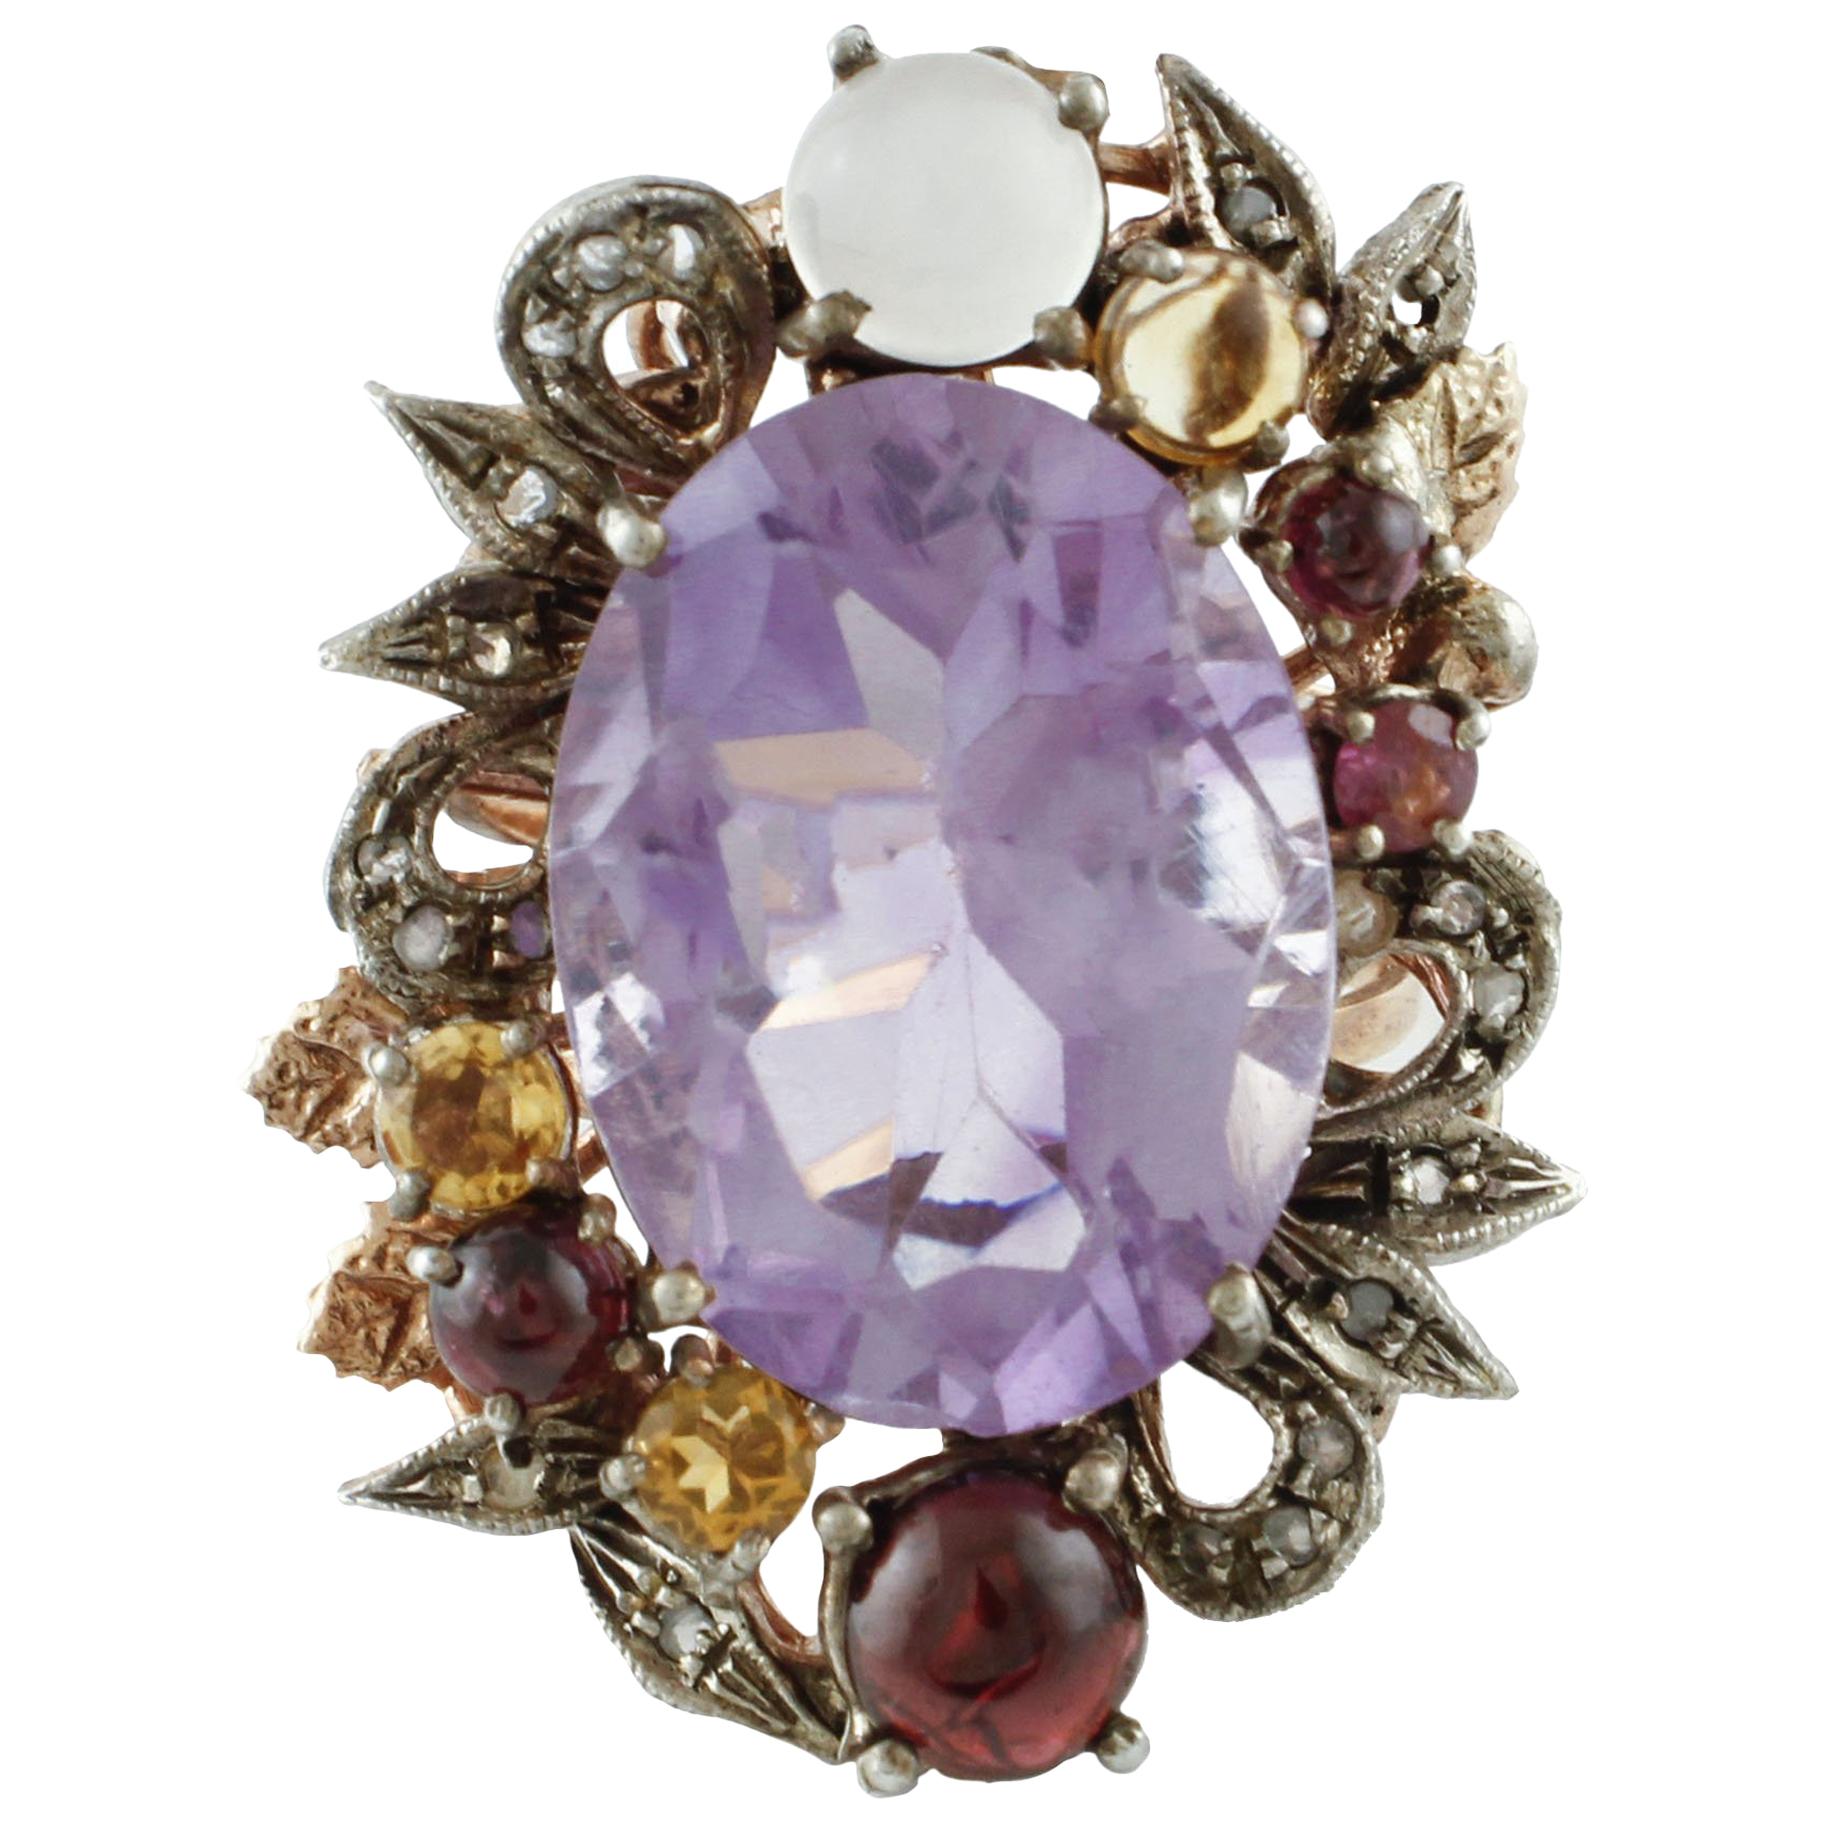 Diamonds Amethyst Yellow Topazes, Garnets Moonstone Rose Gold and Silver Ring